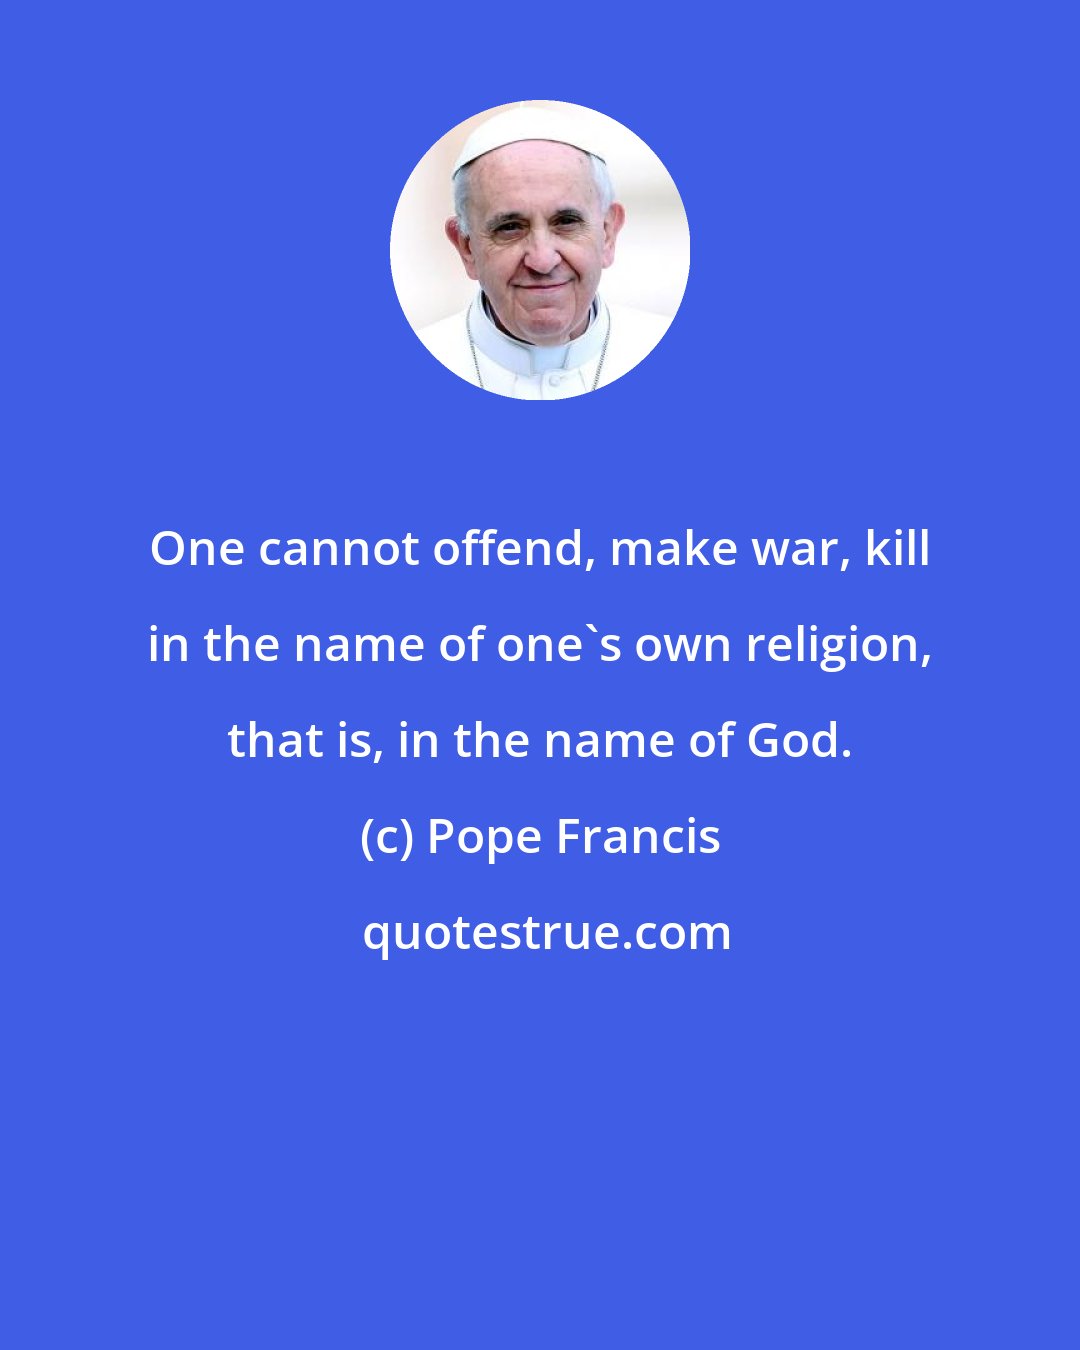 Pope Francis: One cannot offend, make war, kill in the name of one's own religion, that is, in the name of God.